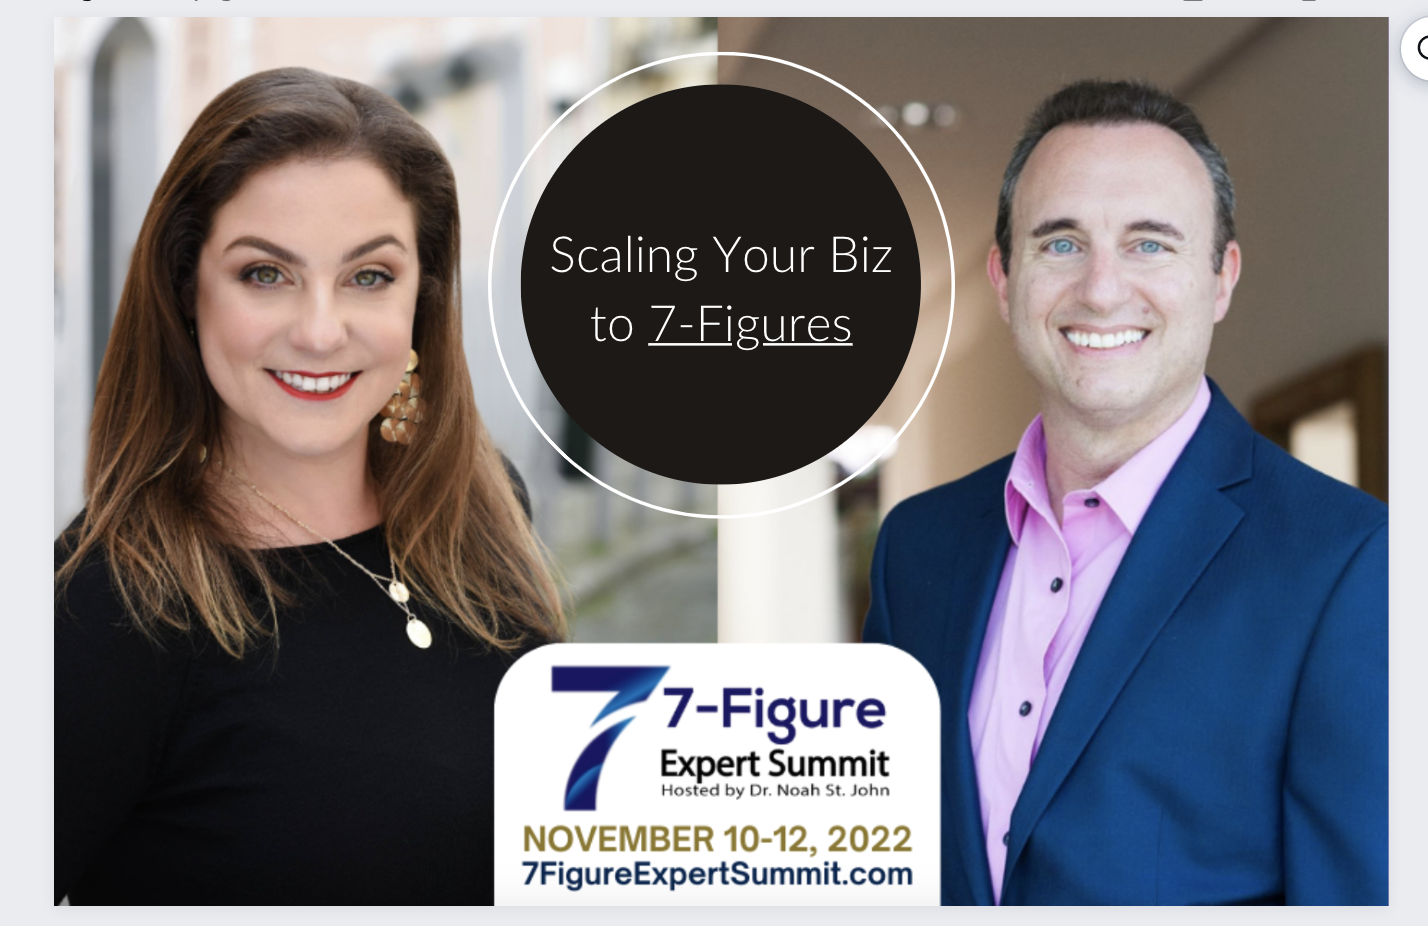 Scaling Your Biz to 7-Figures